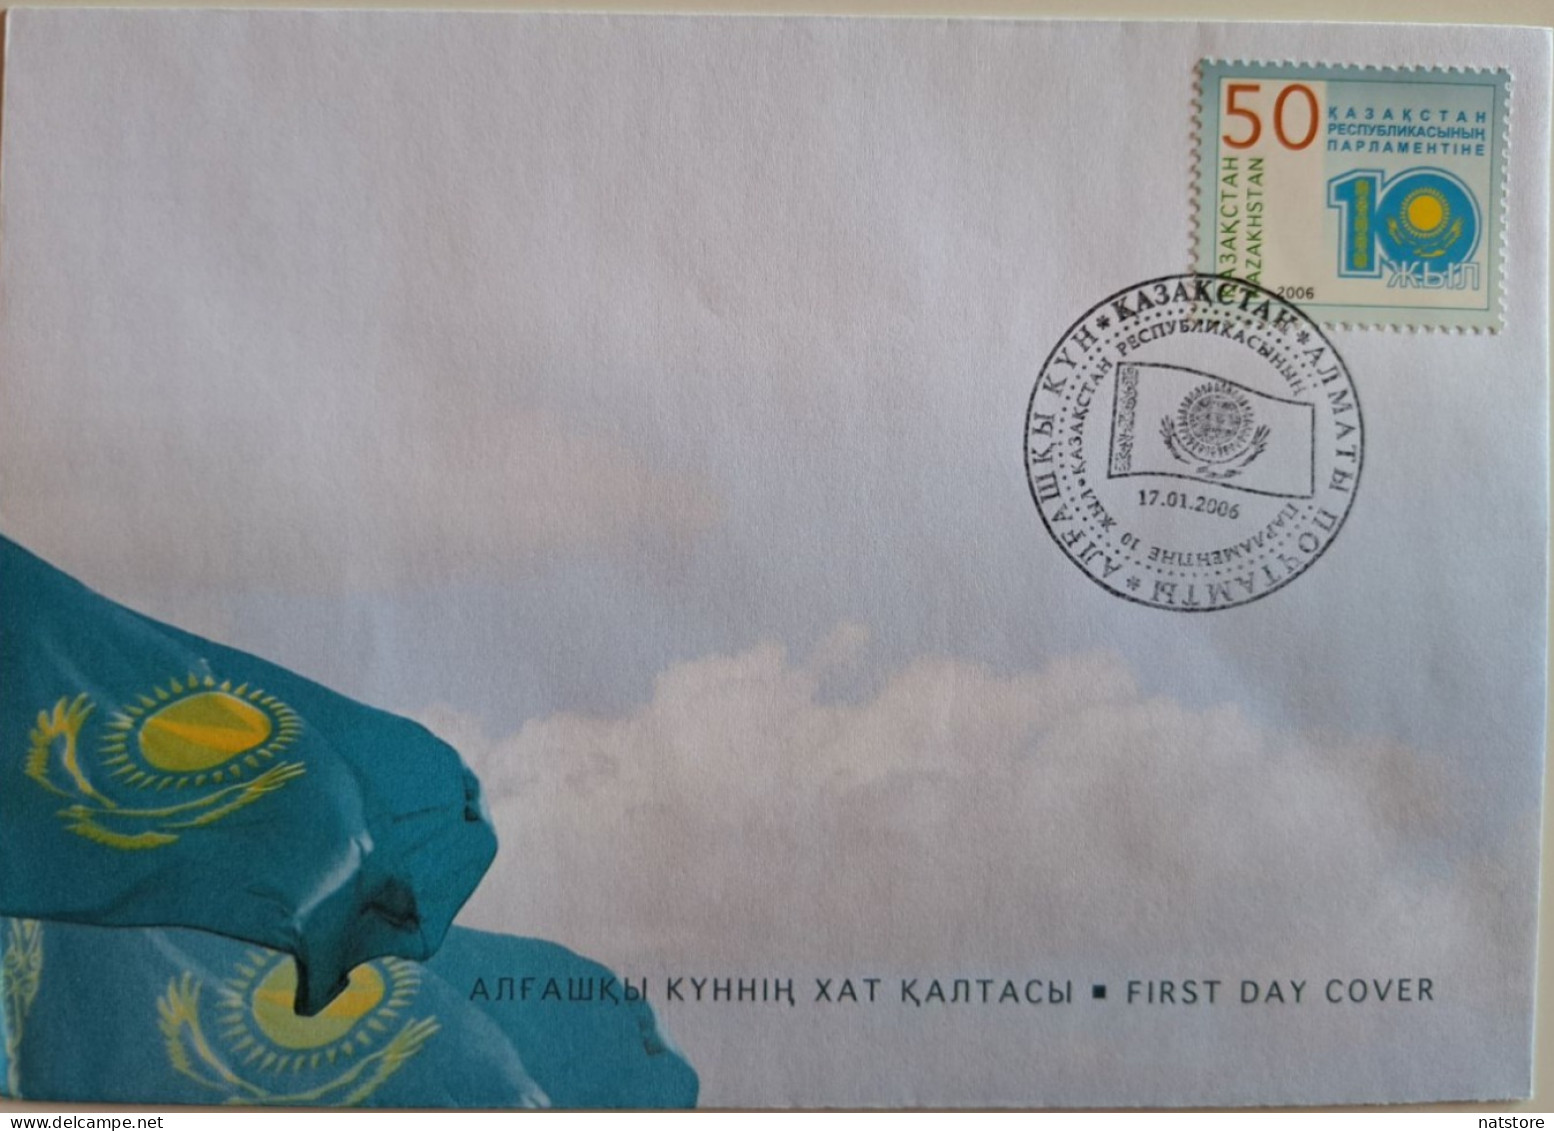 2006..KAZAKHSTAN...FDC WITH  STAMP...NEW..The 10th Anniversary Of Parliament Of Republic Of Kazakhstan..RARE!!! - Briefe